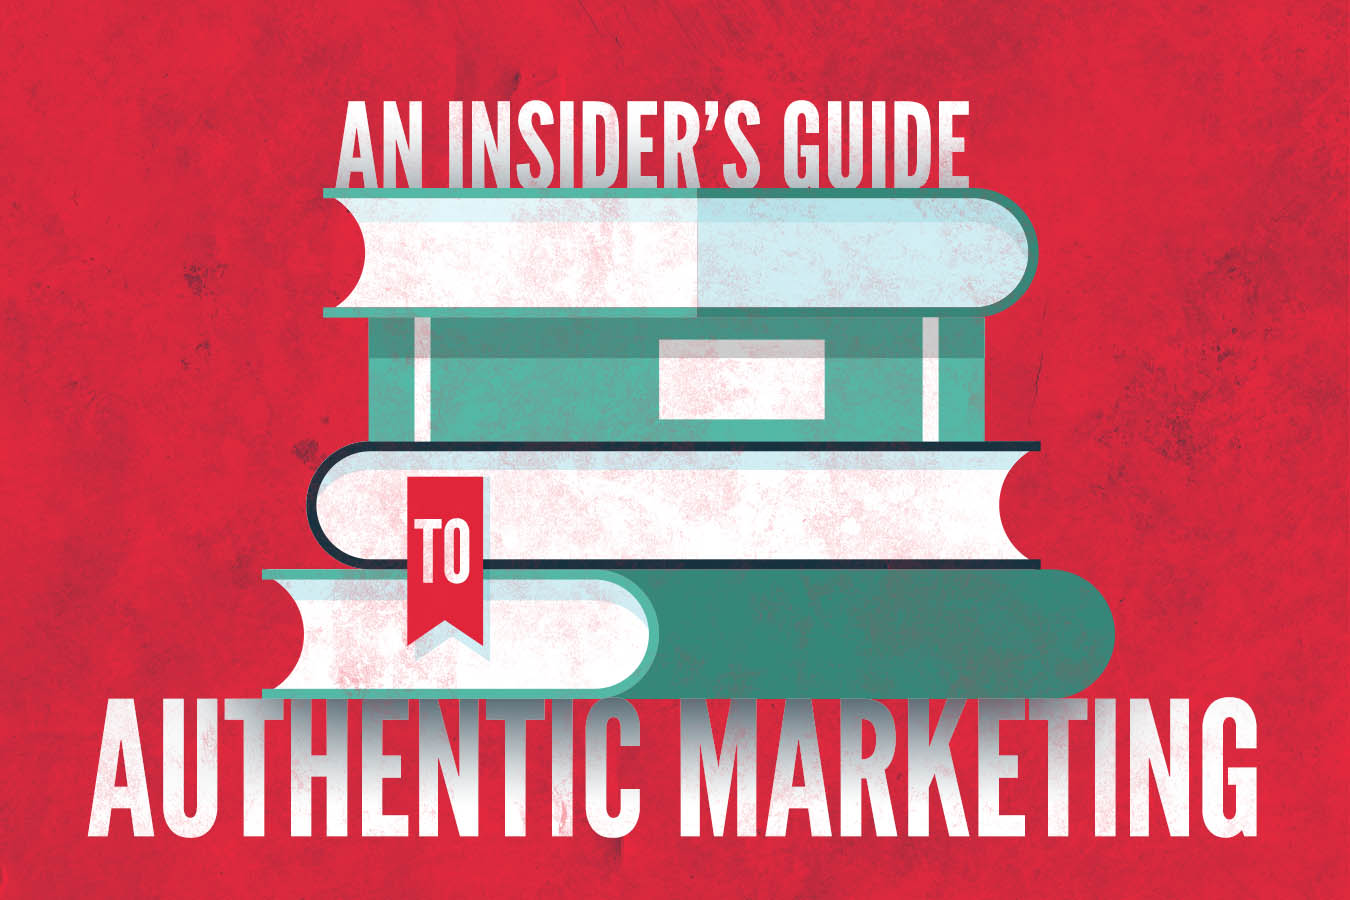 An Insider’s Guide to Authentic Marketing